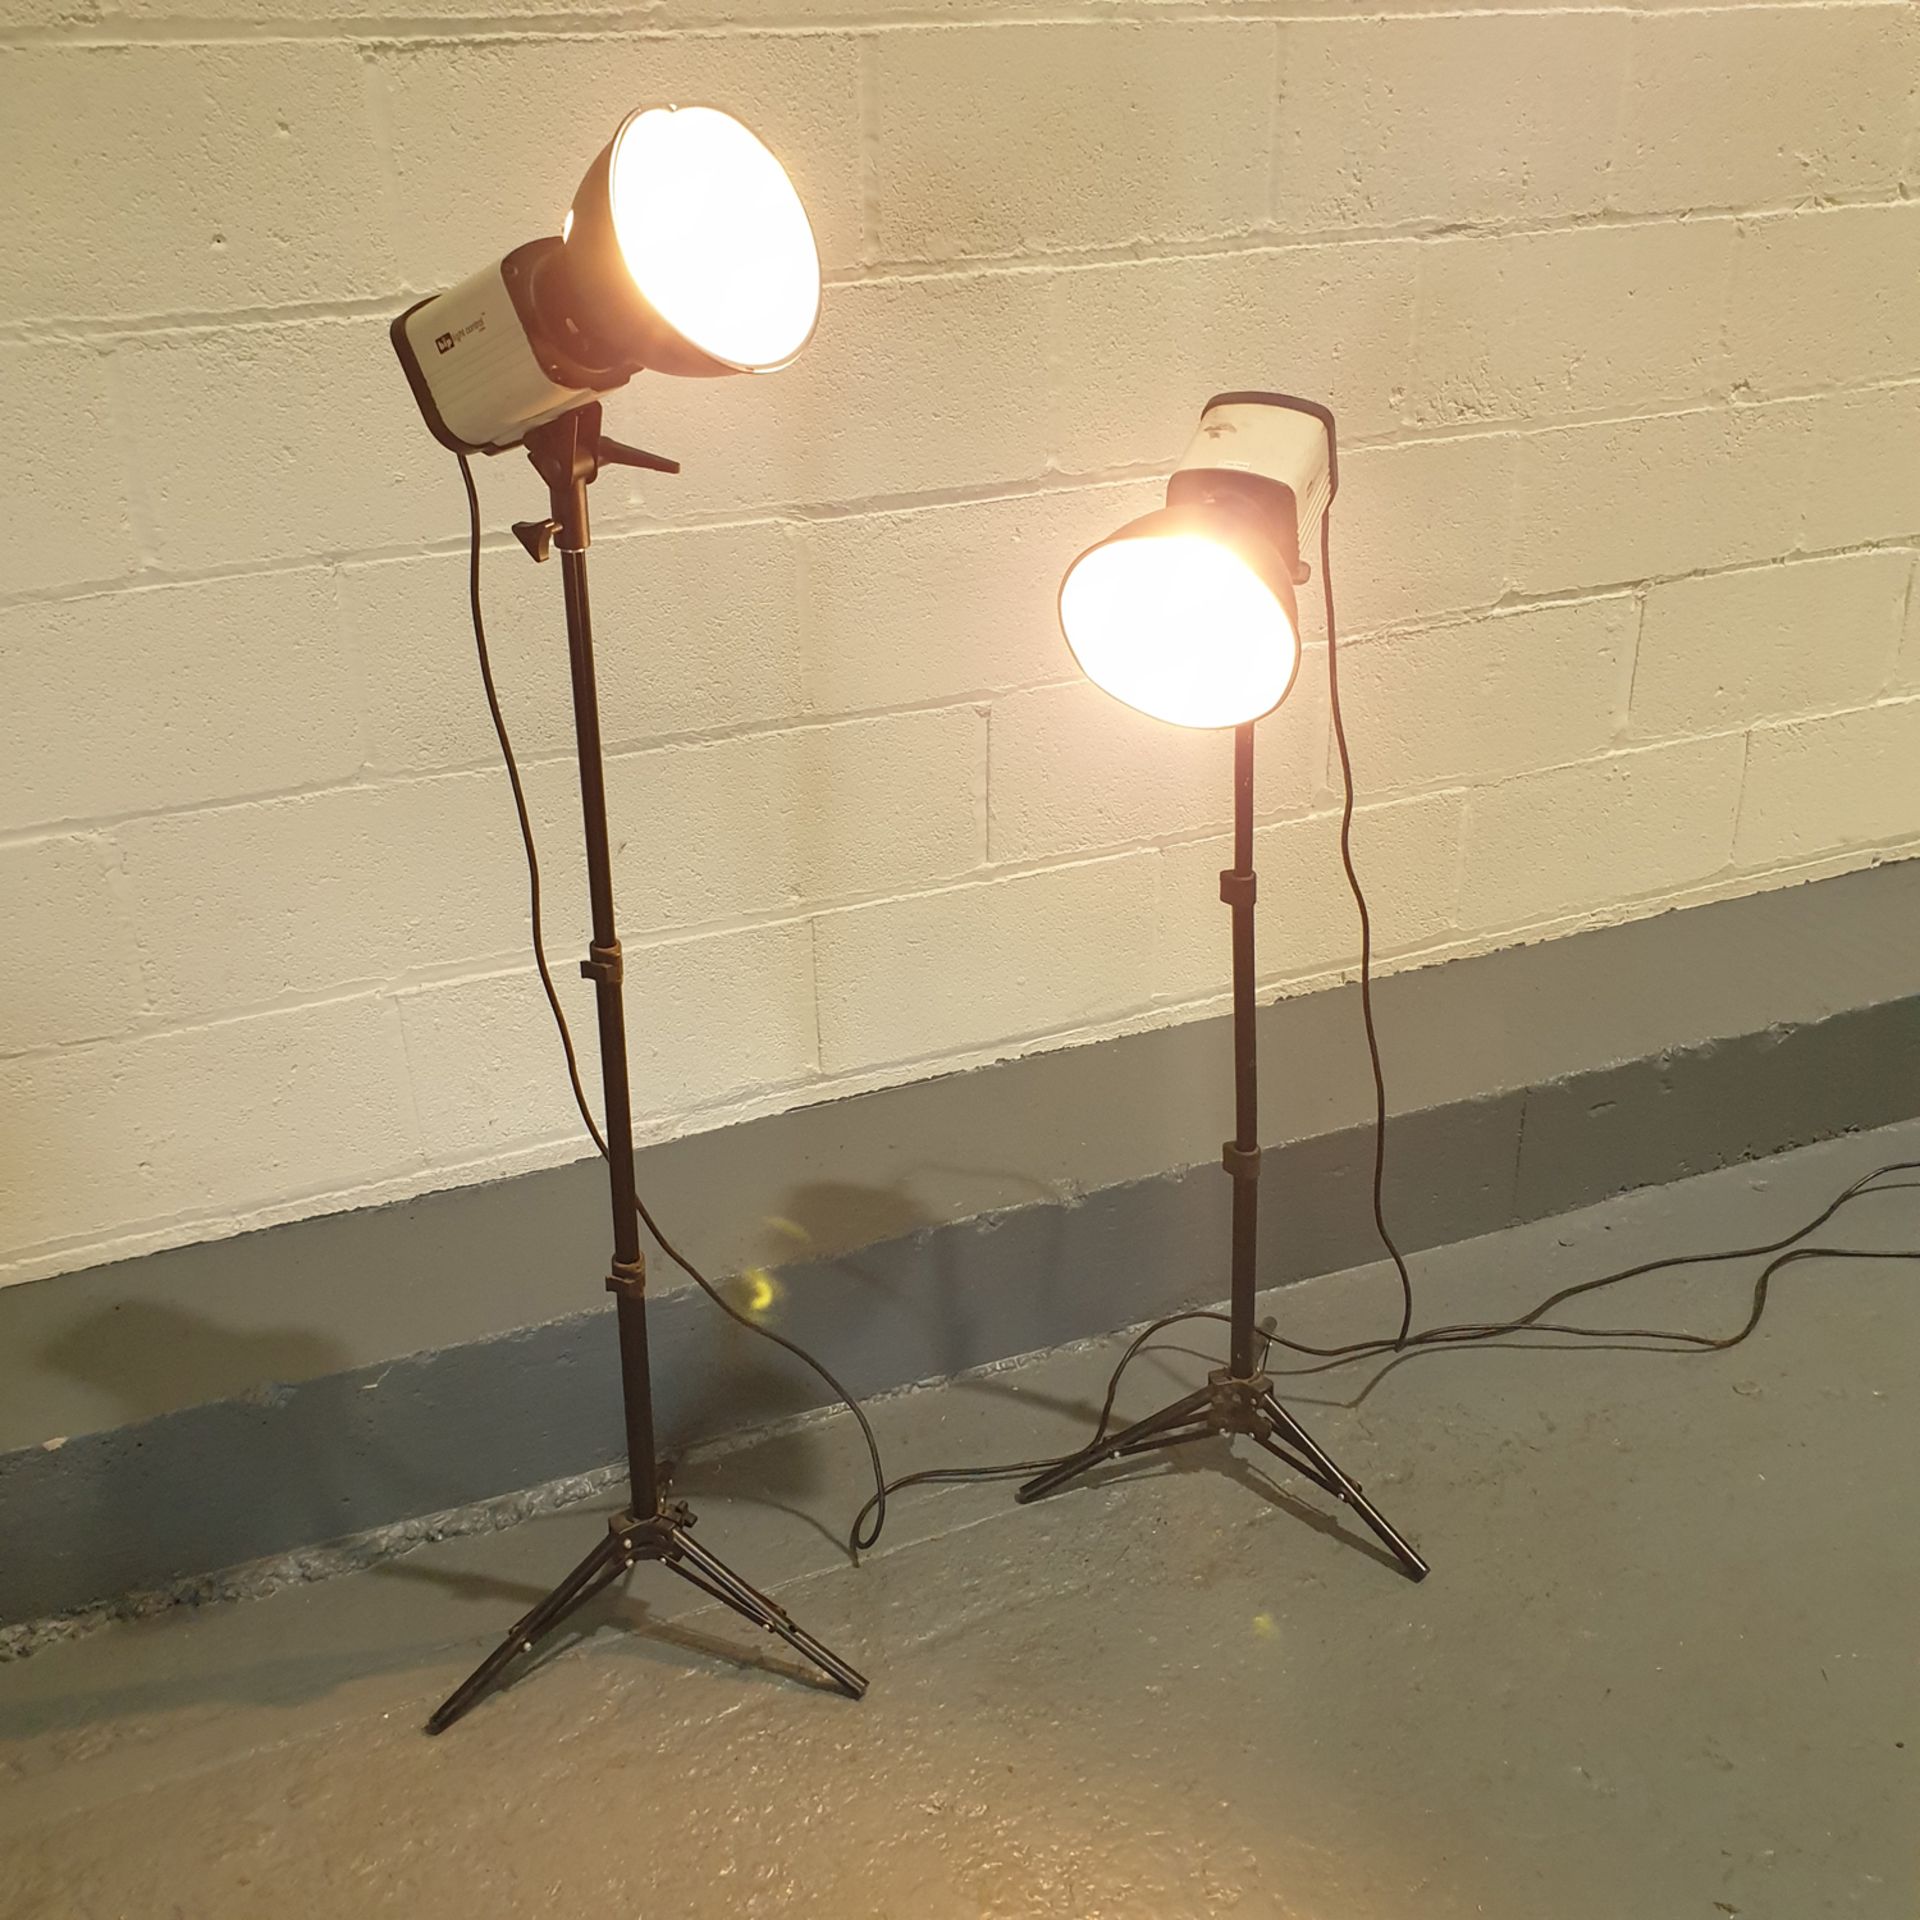 bip Light Control Fluorescent Lamps with Adjustable Tripod Stands. - Image 3 of 12